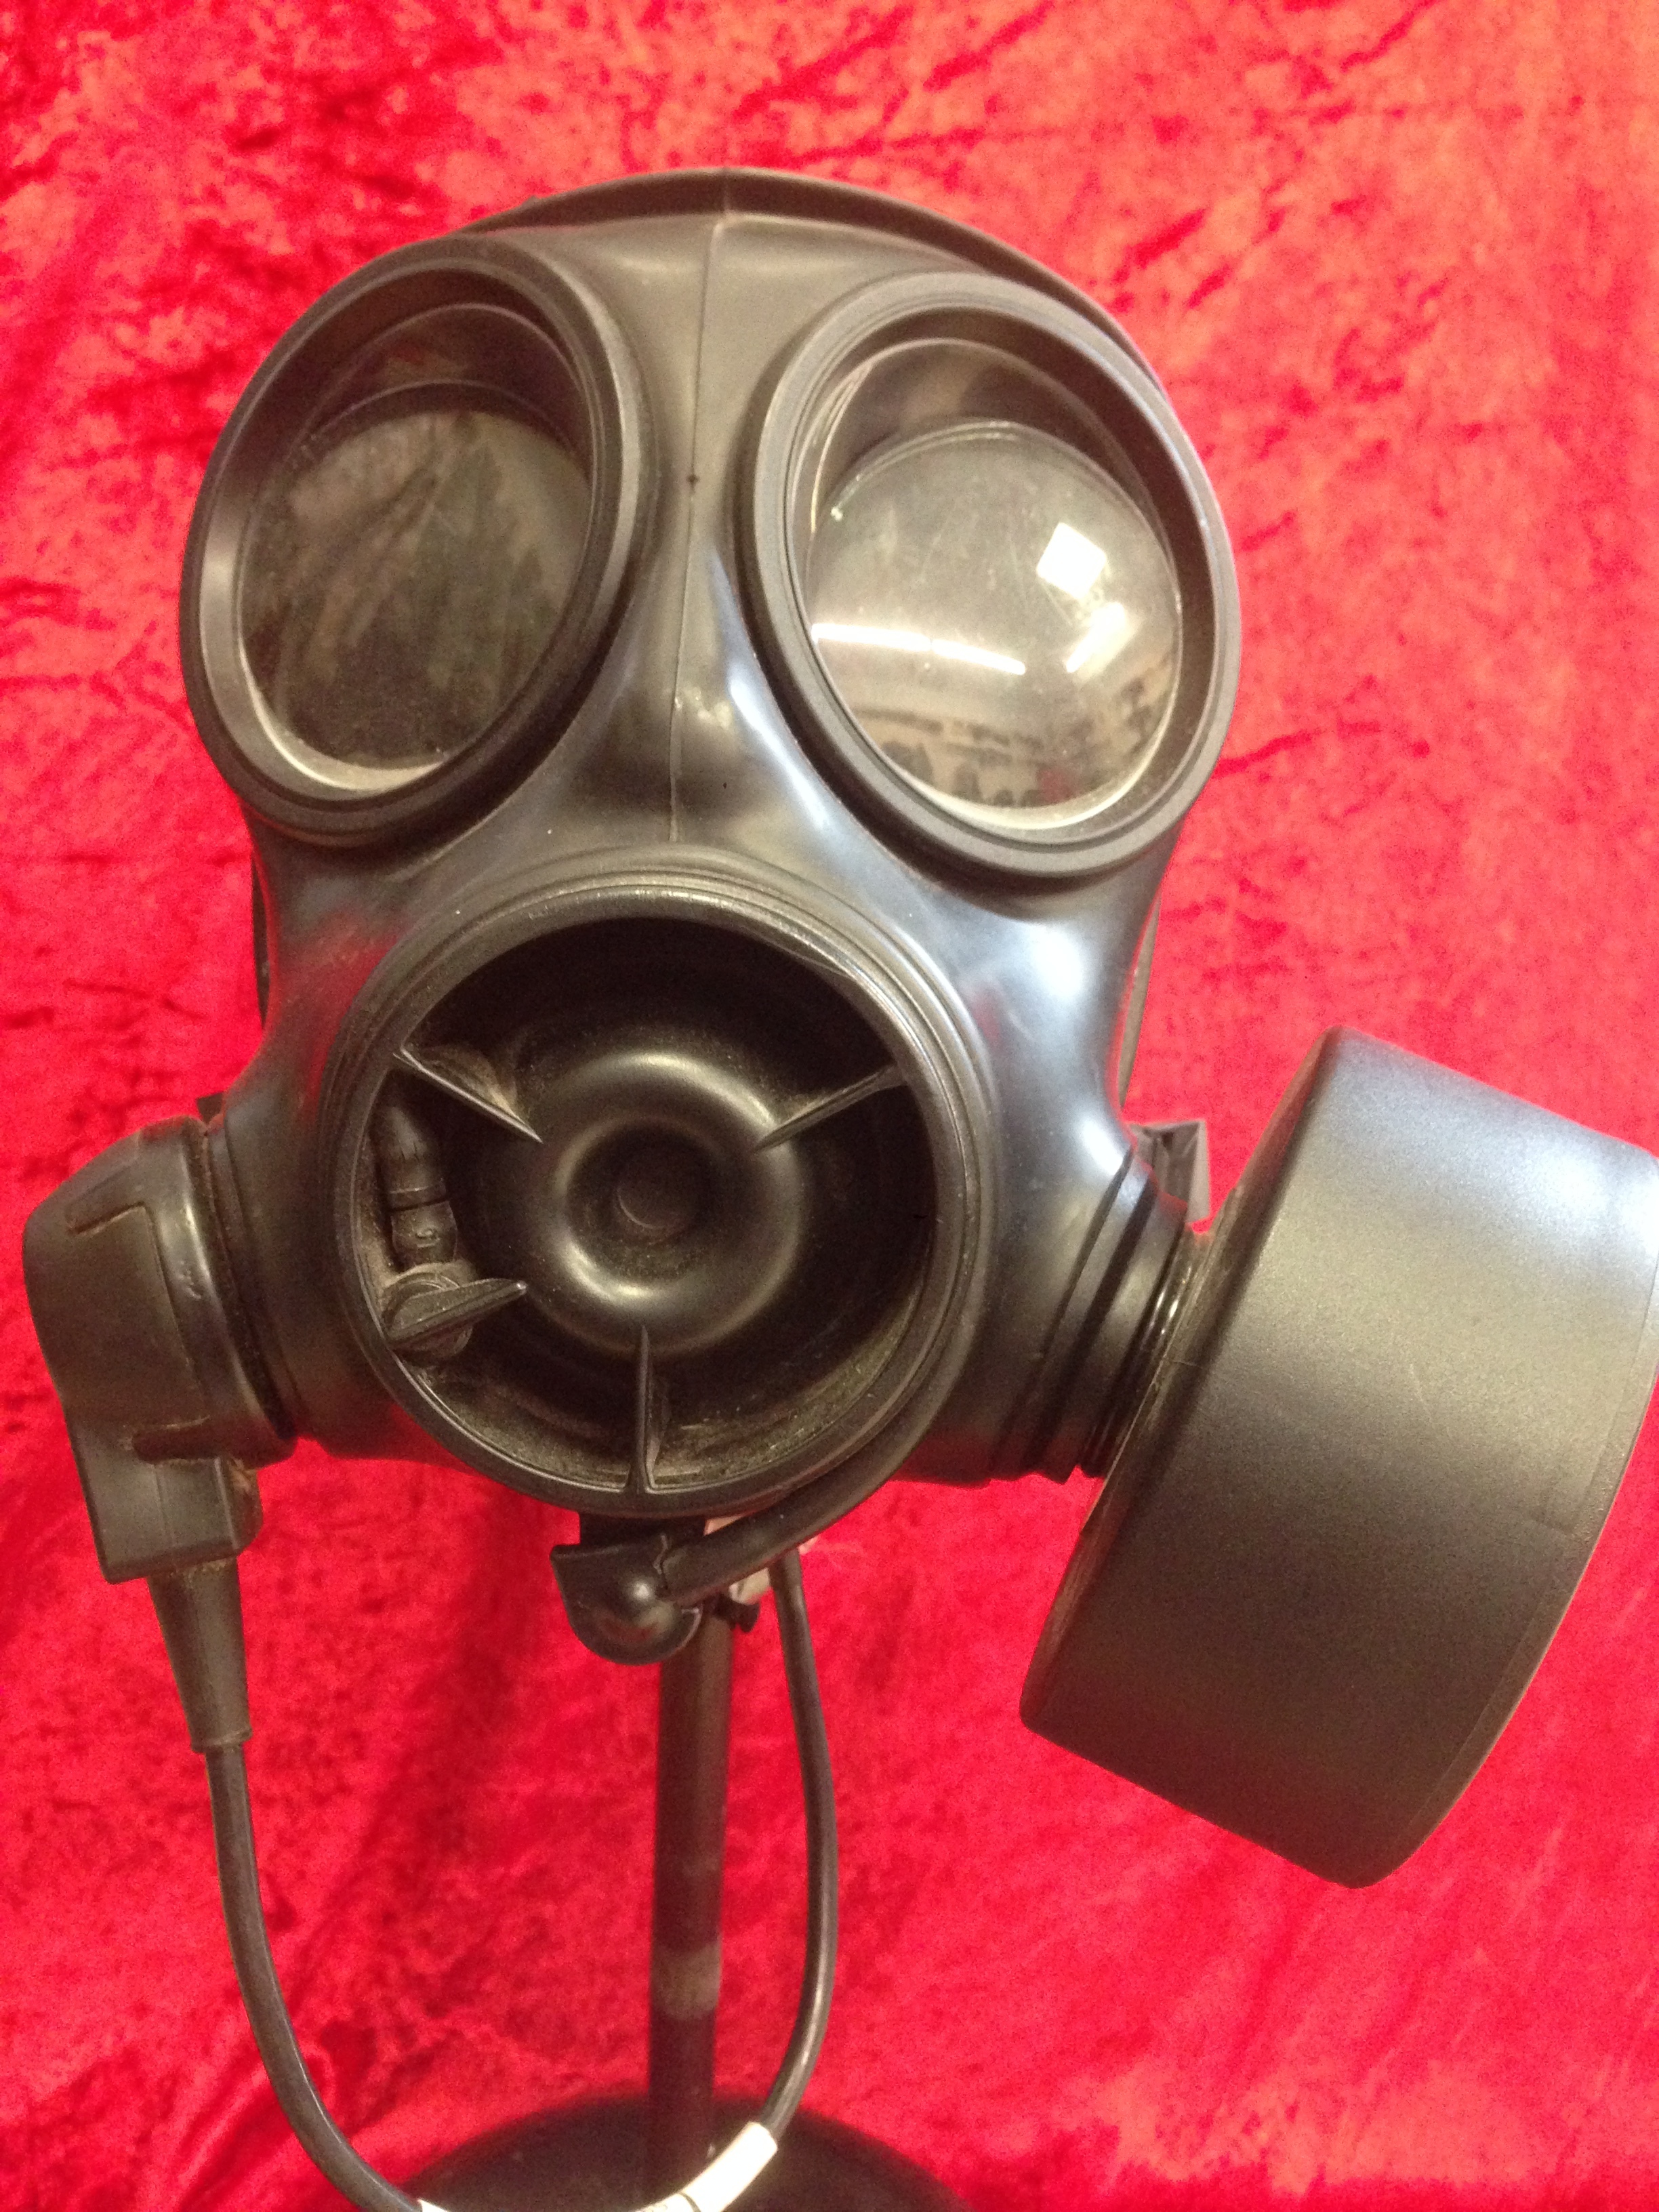 S10 Gas Mask Microphone